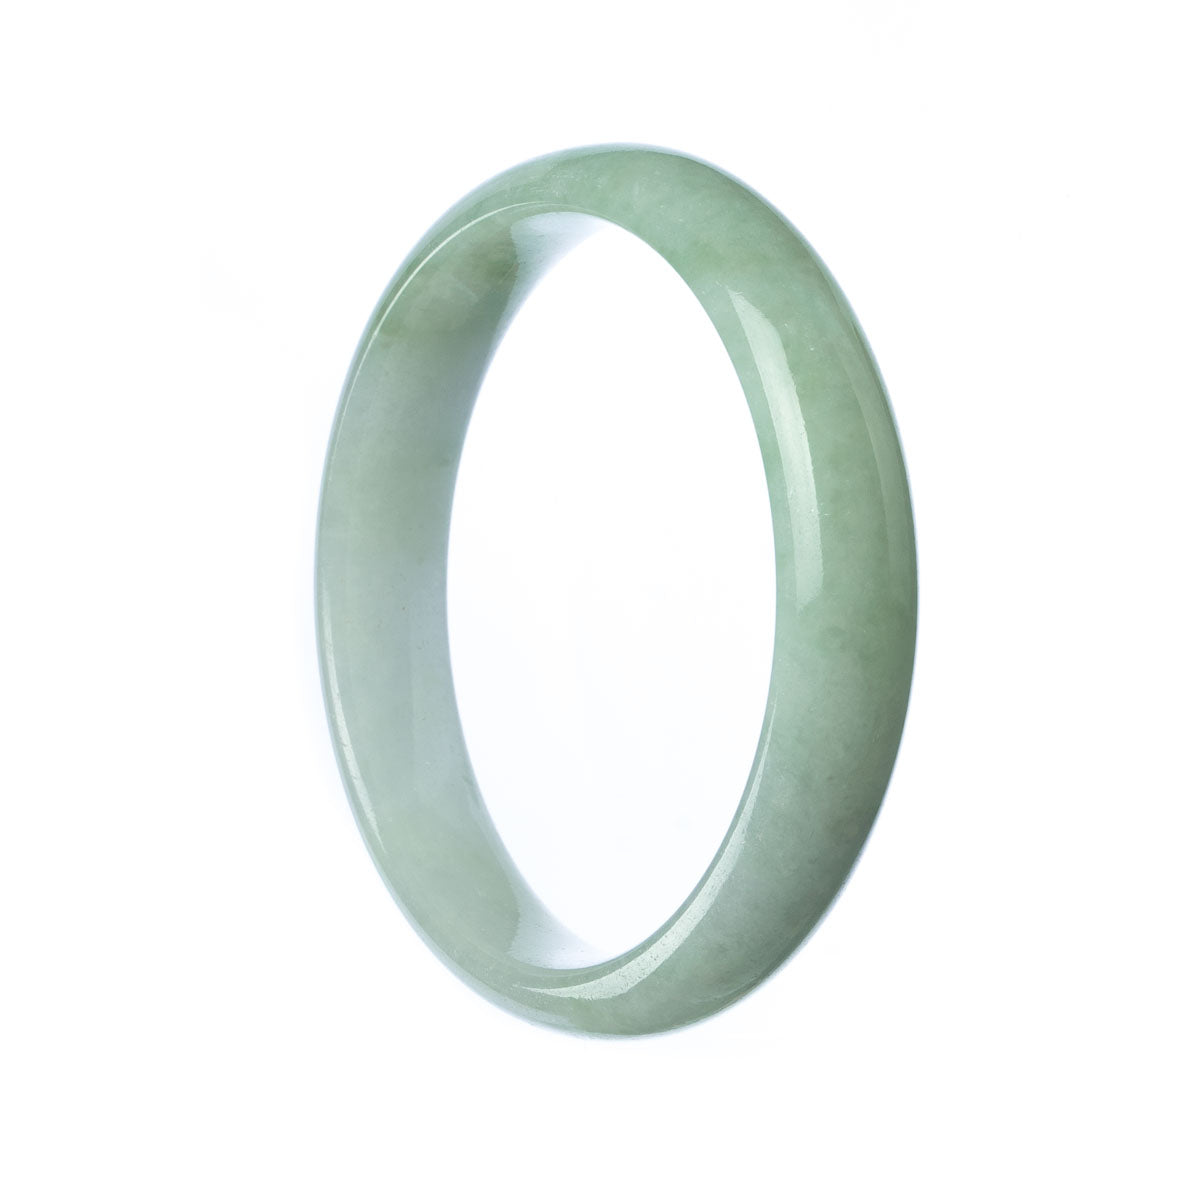 A close-up image of a pale green Burma Jade bangle bracelet, certified as Grade A. The bracelet has a half moon shape and measures 57mm in diameter. This luxurious accessory is from the MAYS™ collection.